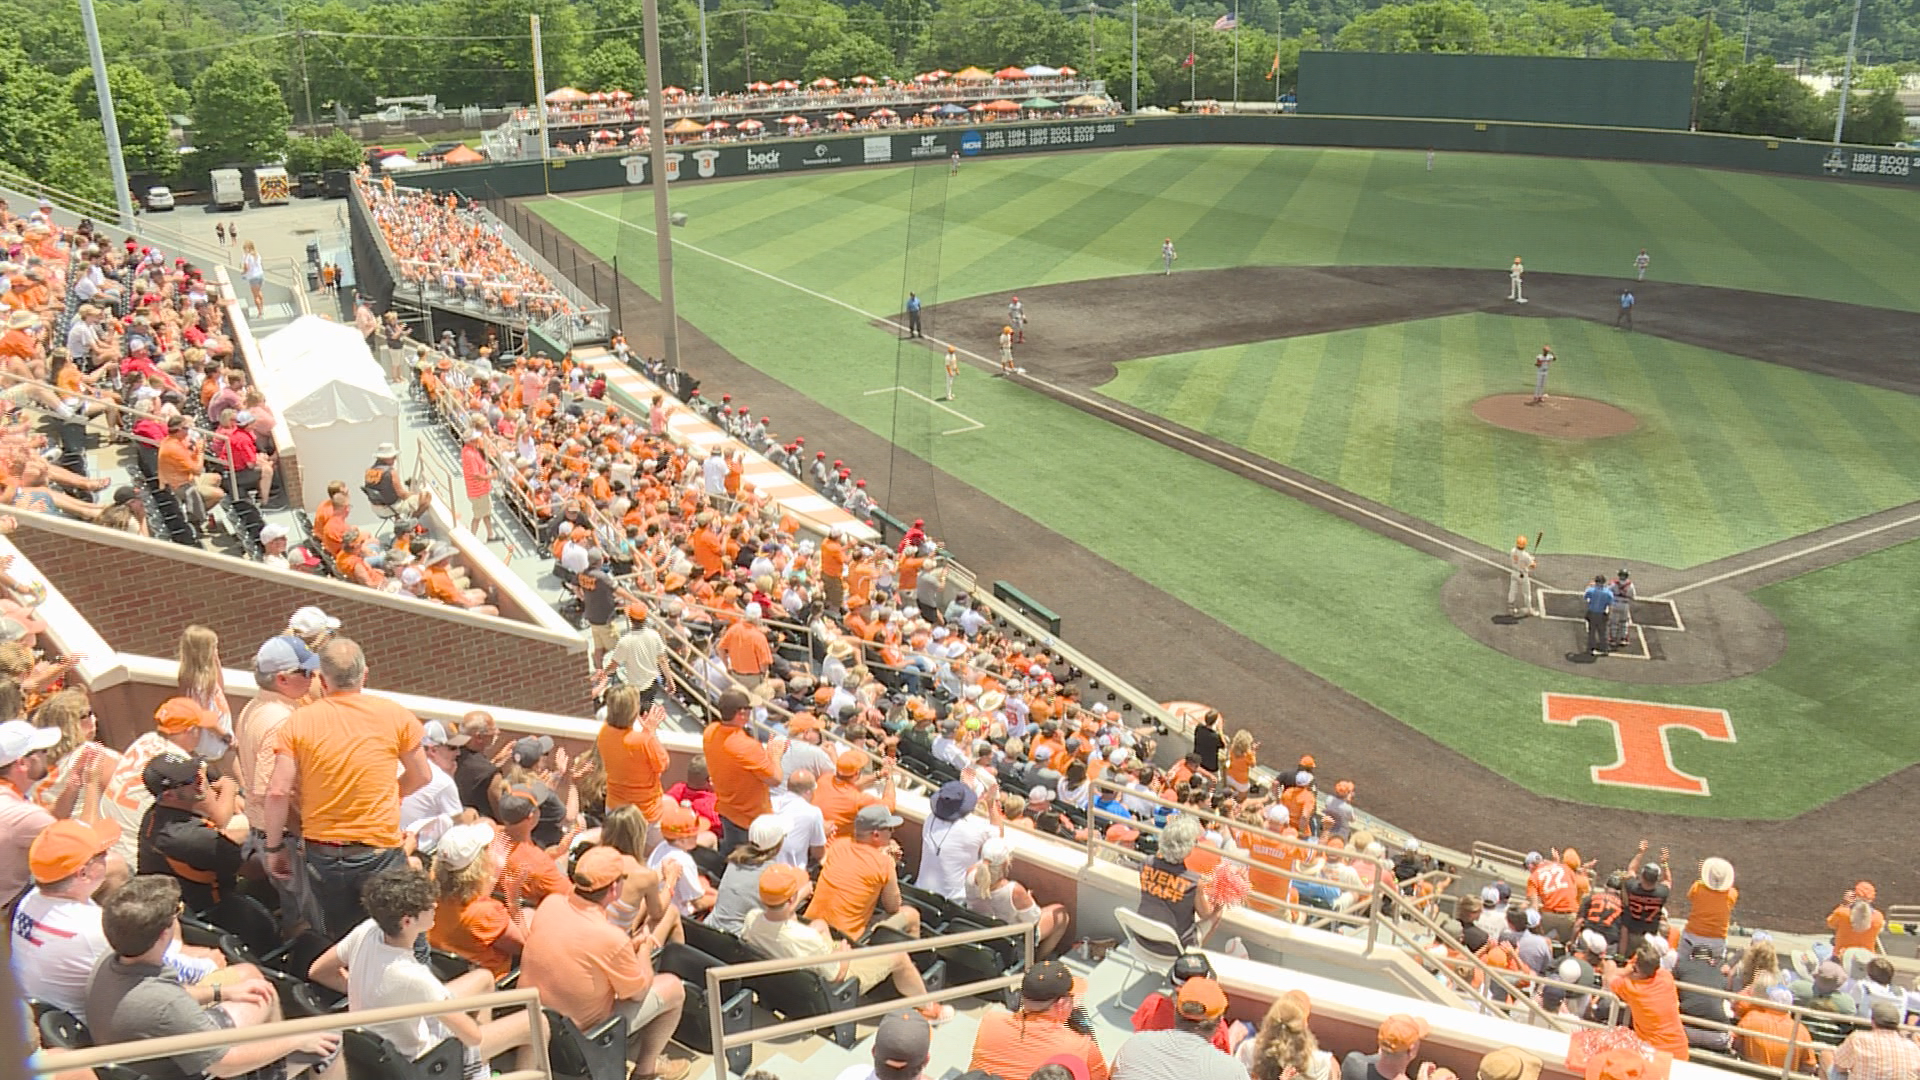 Baseball Vols to face outside competition this fall